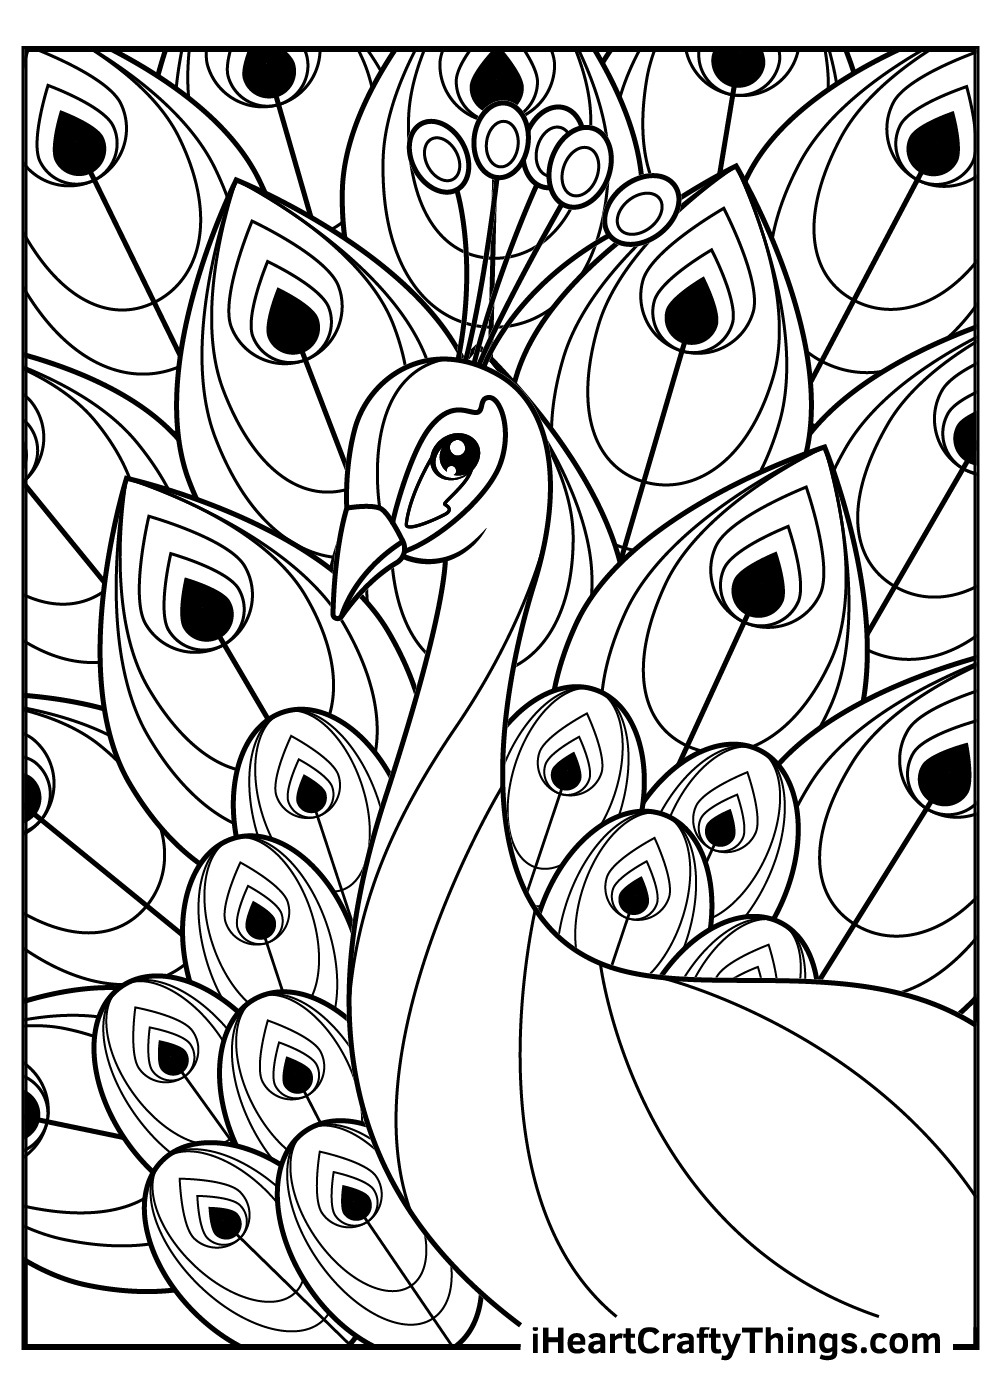 Printable Peacocks Coloring Pages Updated 2021